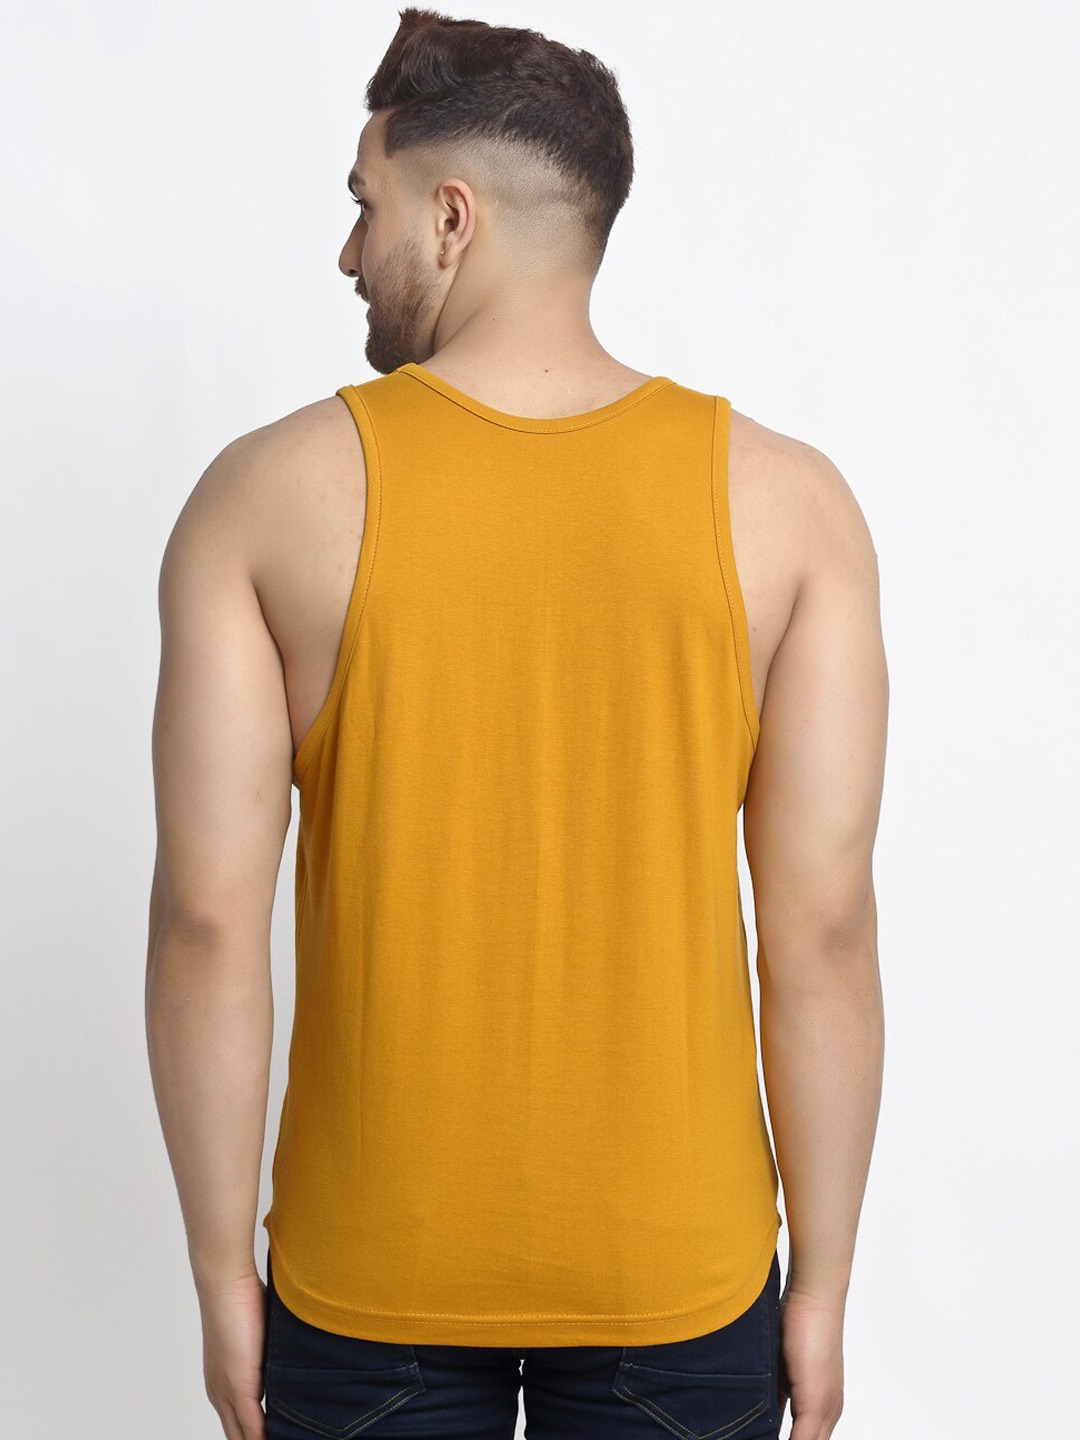 Clothing Innerwear Vests | Friskers Men Gold-Colored & White Eat Sleep Printed Pure Cotton Innerwear Vest - EX82006